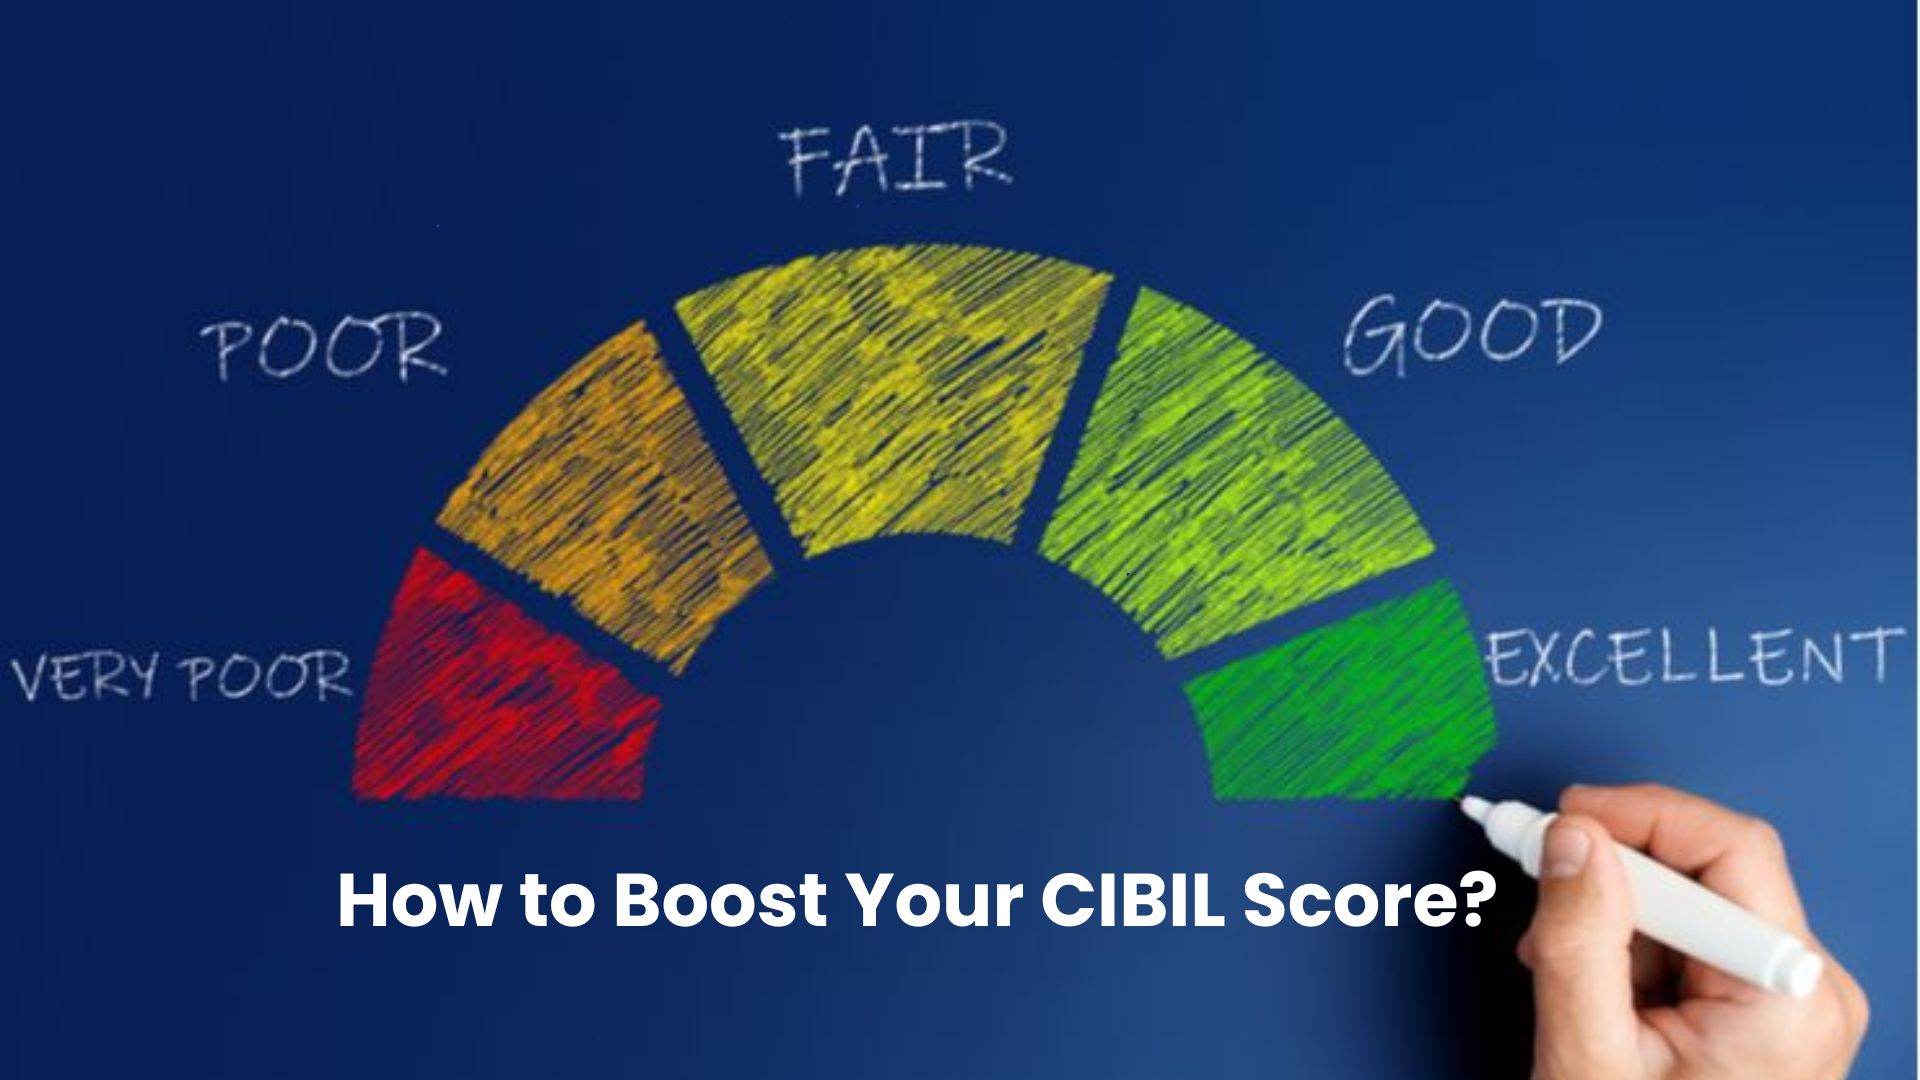 How to Boost Your CIBIL Score? Use These Five Prepaid Credit Cards